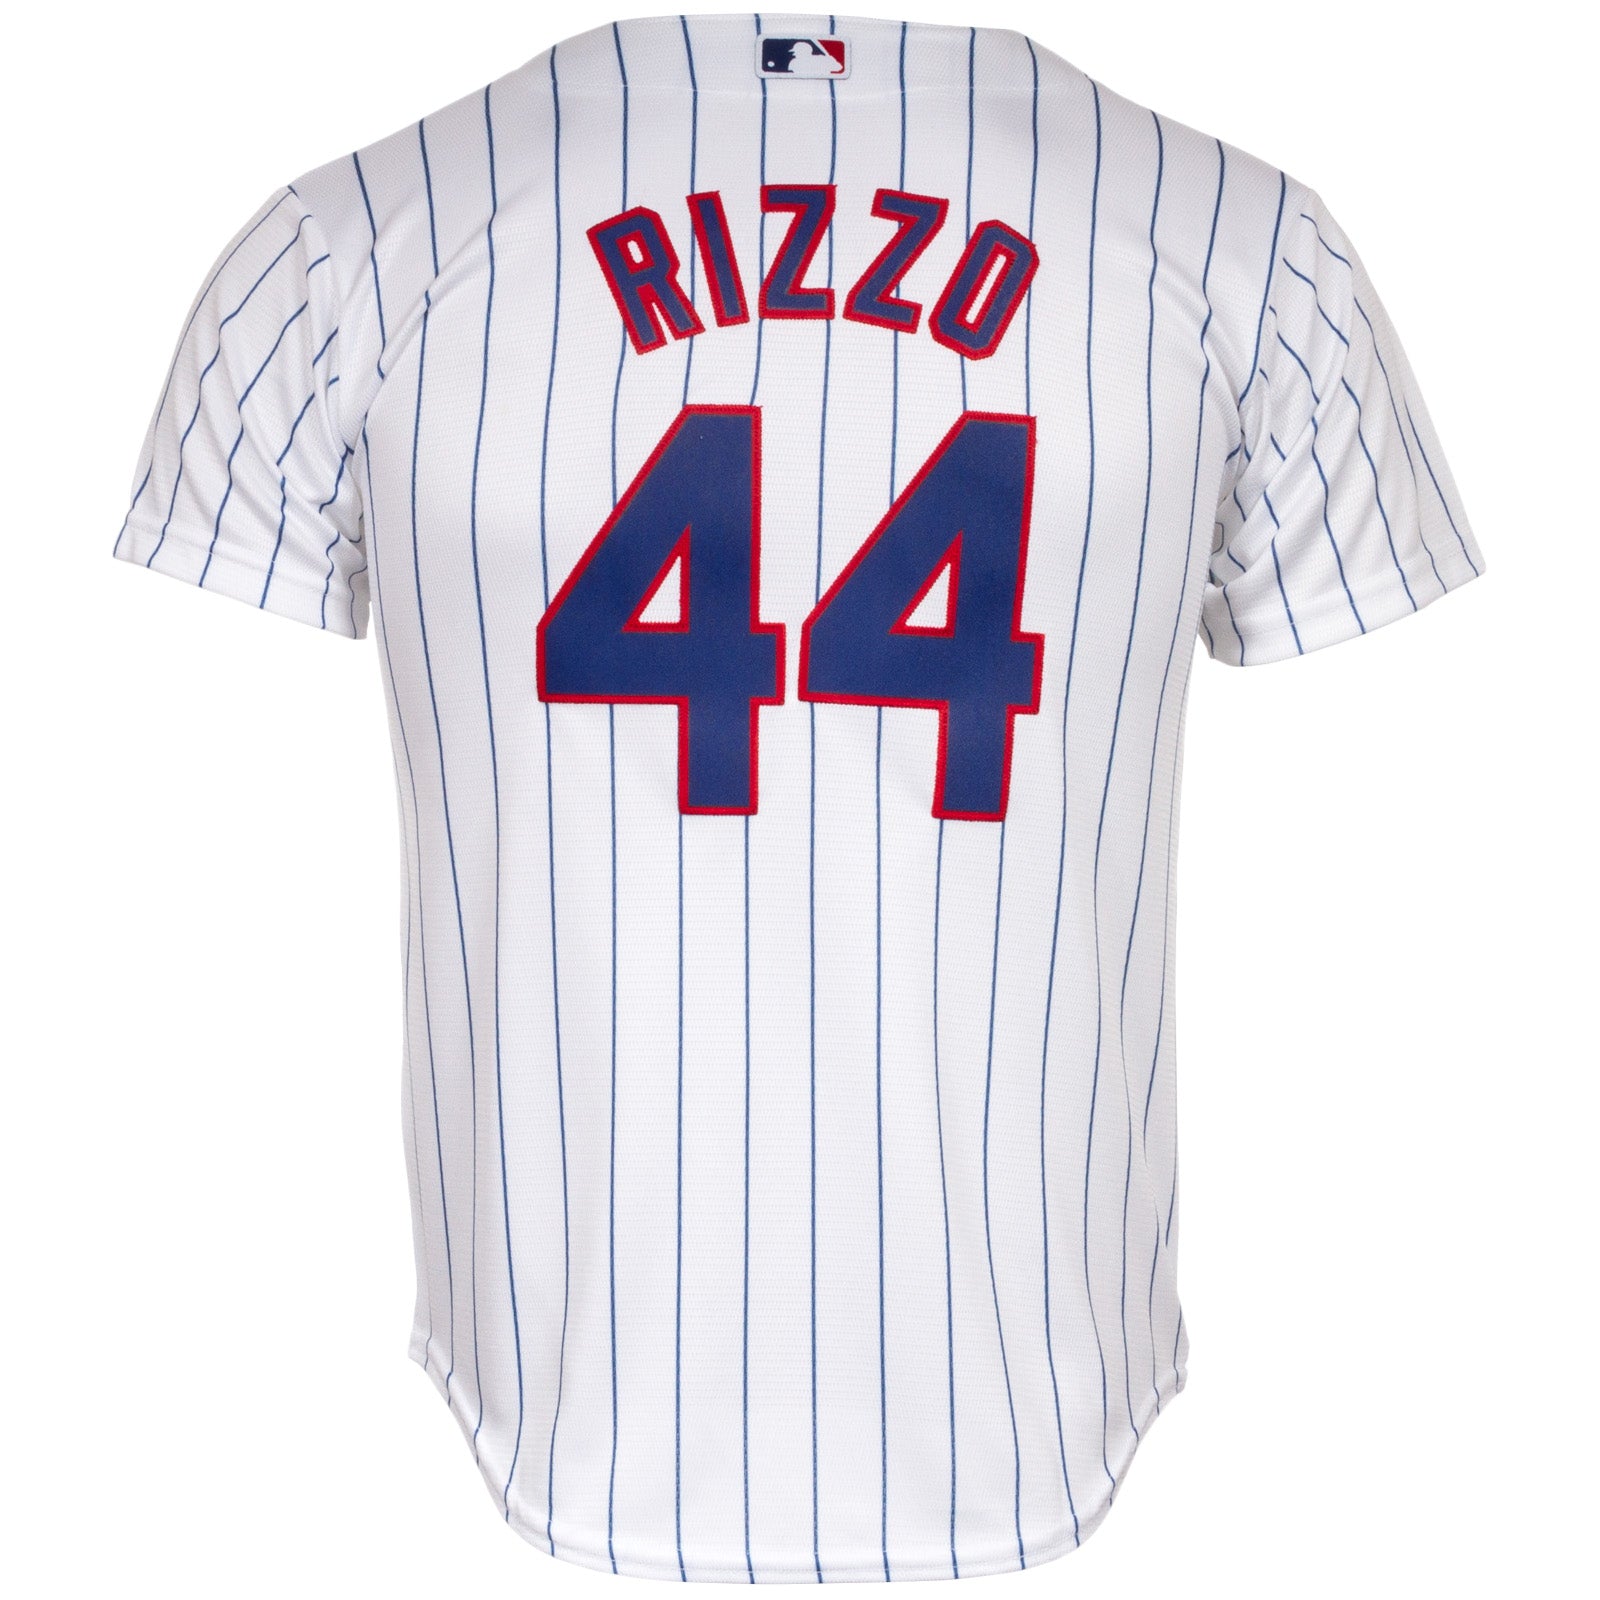 youth anthony rizzo jersey